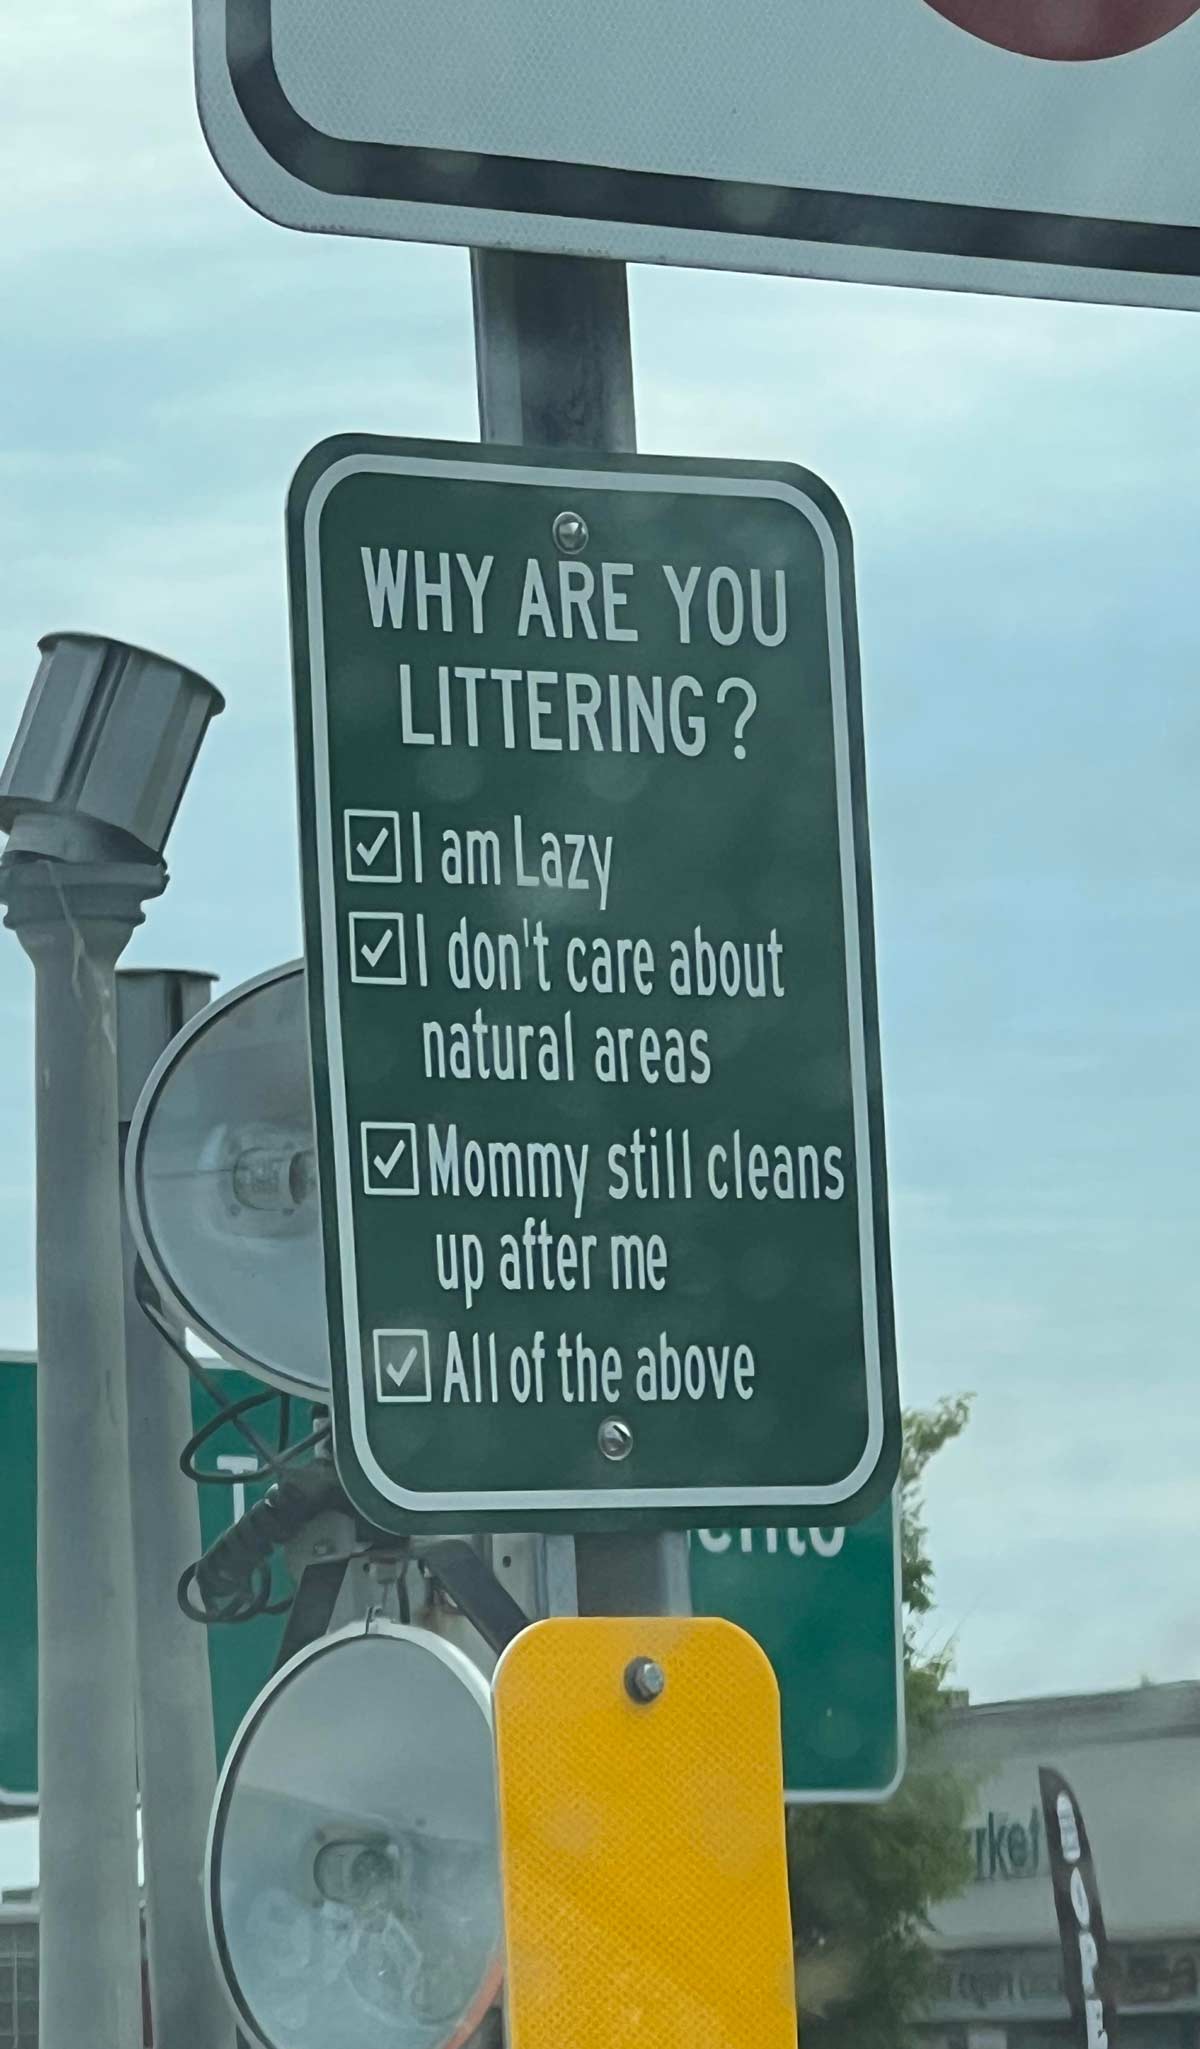 Saw this littering sign while waiting at an intersection